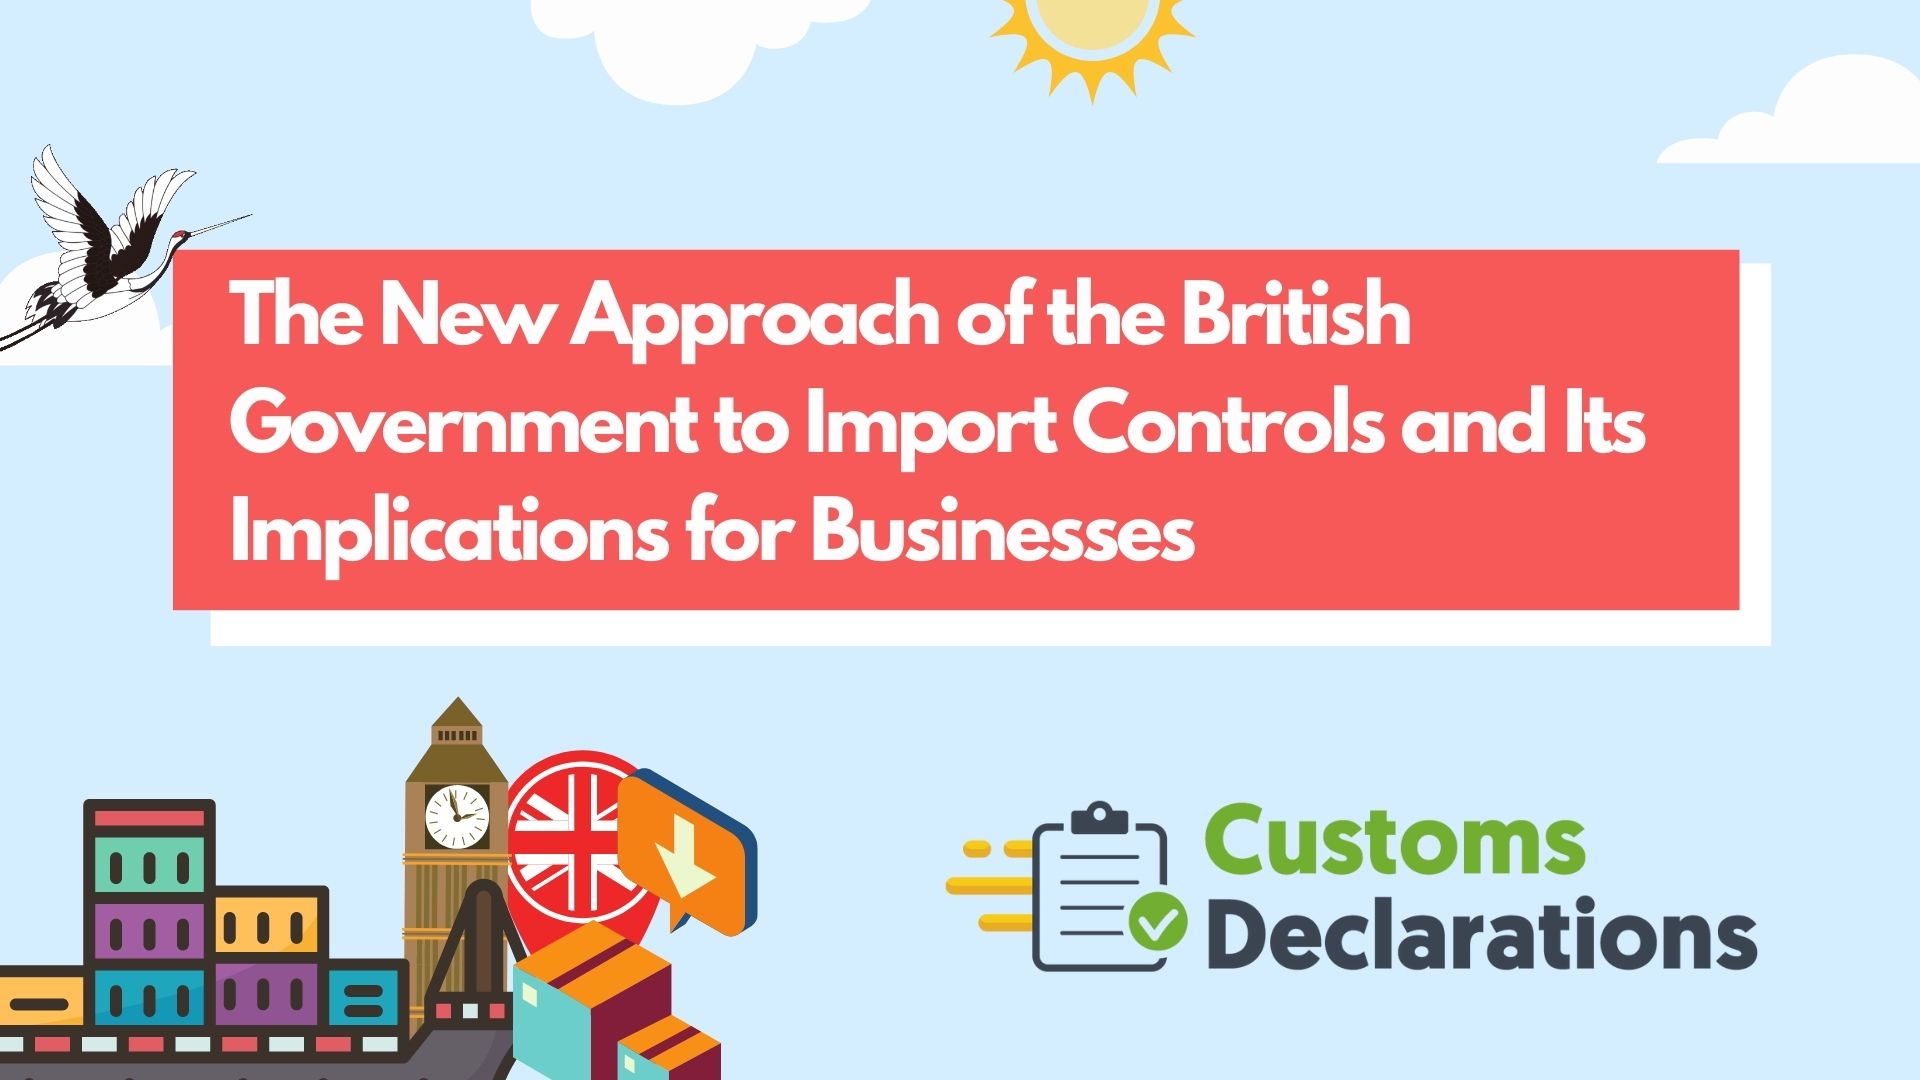 The “New Approach” of the British Government to Import Controls and Its Implications for Businesses